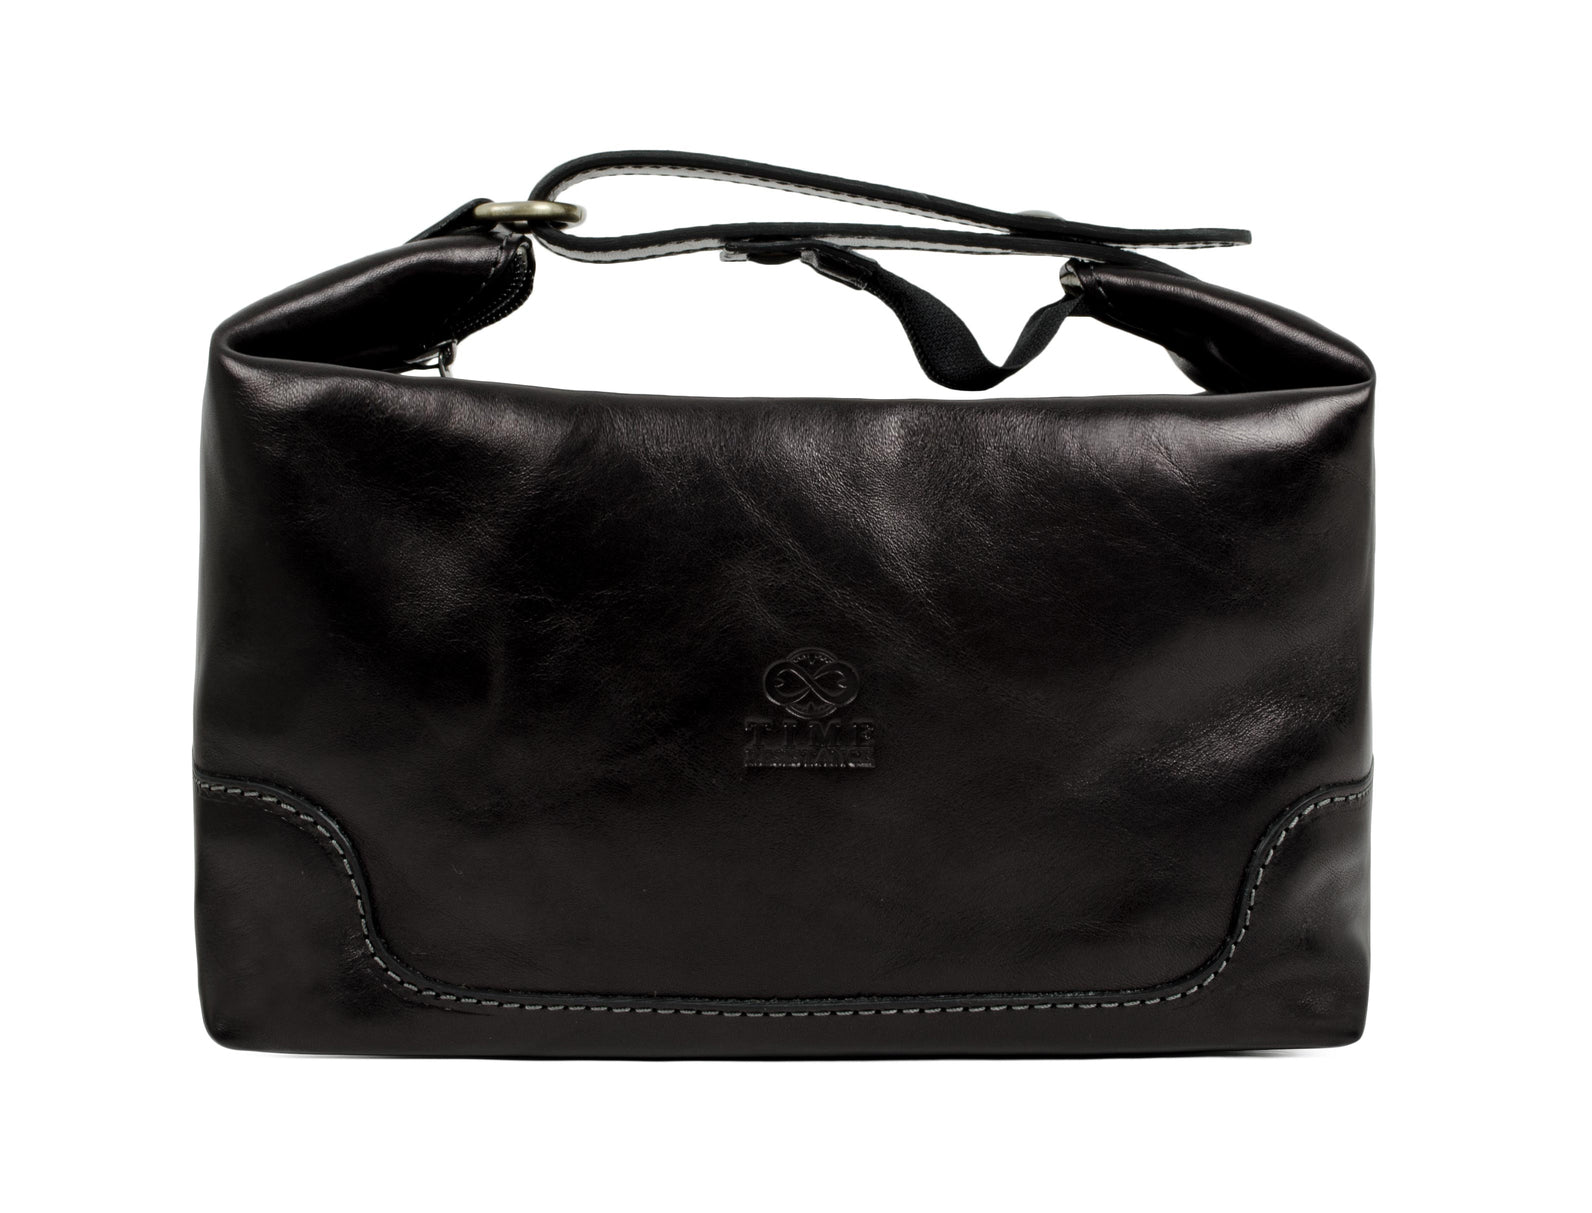 Leather Toiletry Bag - Autumn Leaves